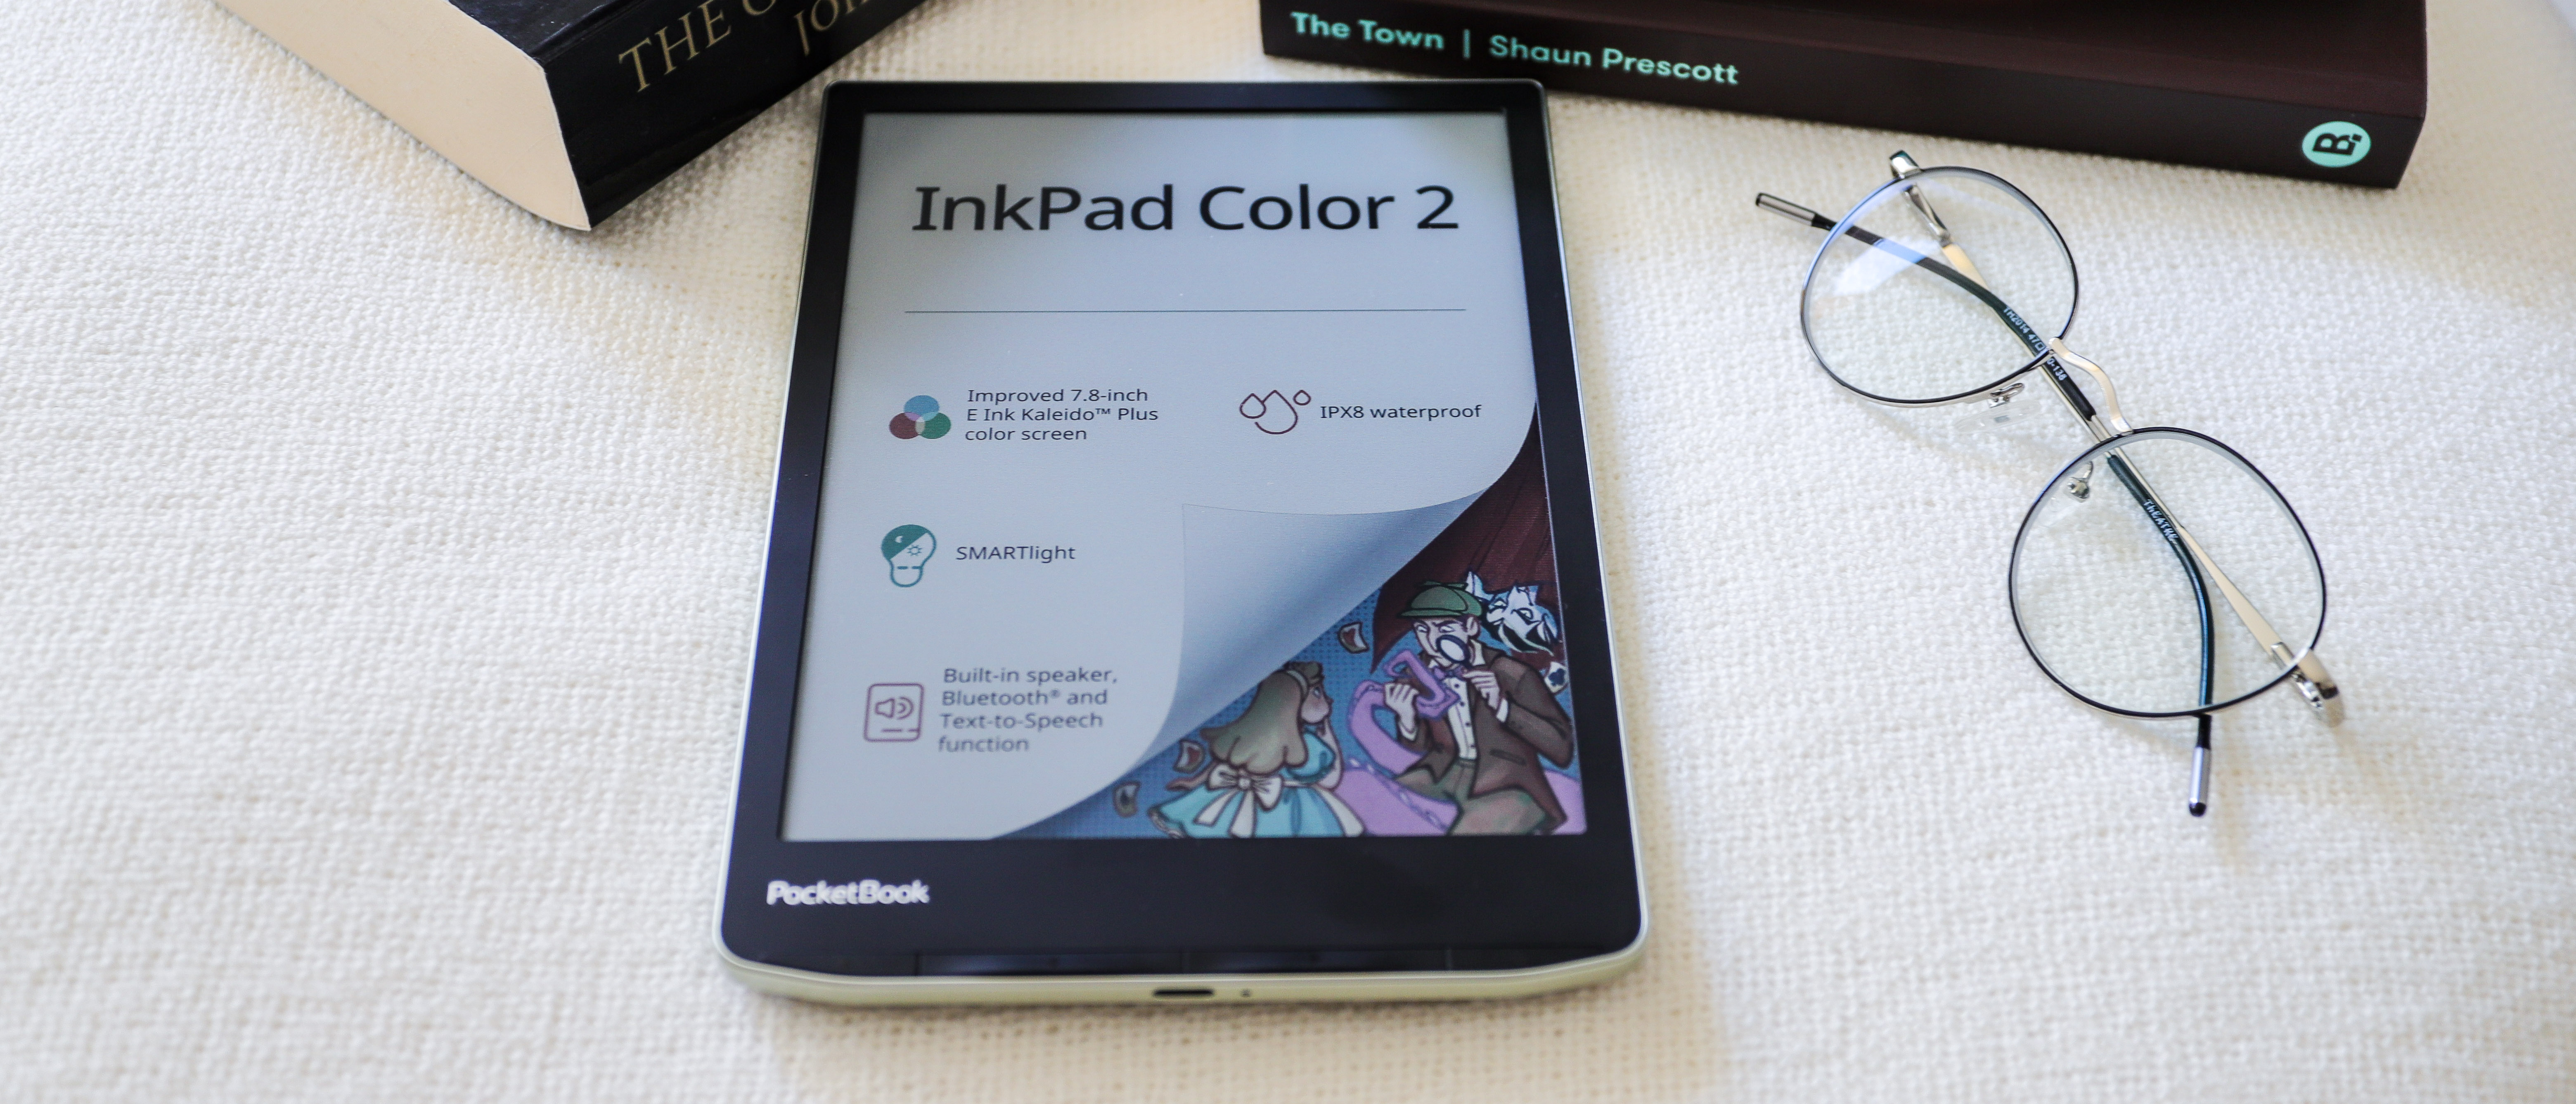 PocketBook InkPad Color 2 review: an old color screen on an improved ...